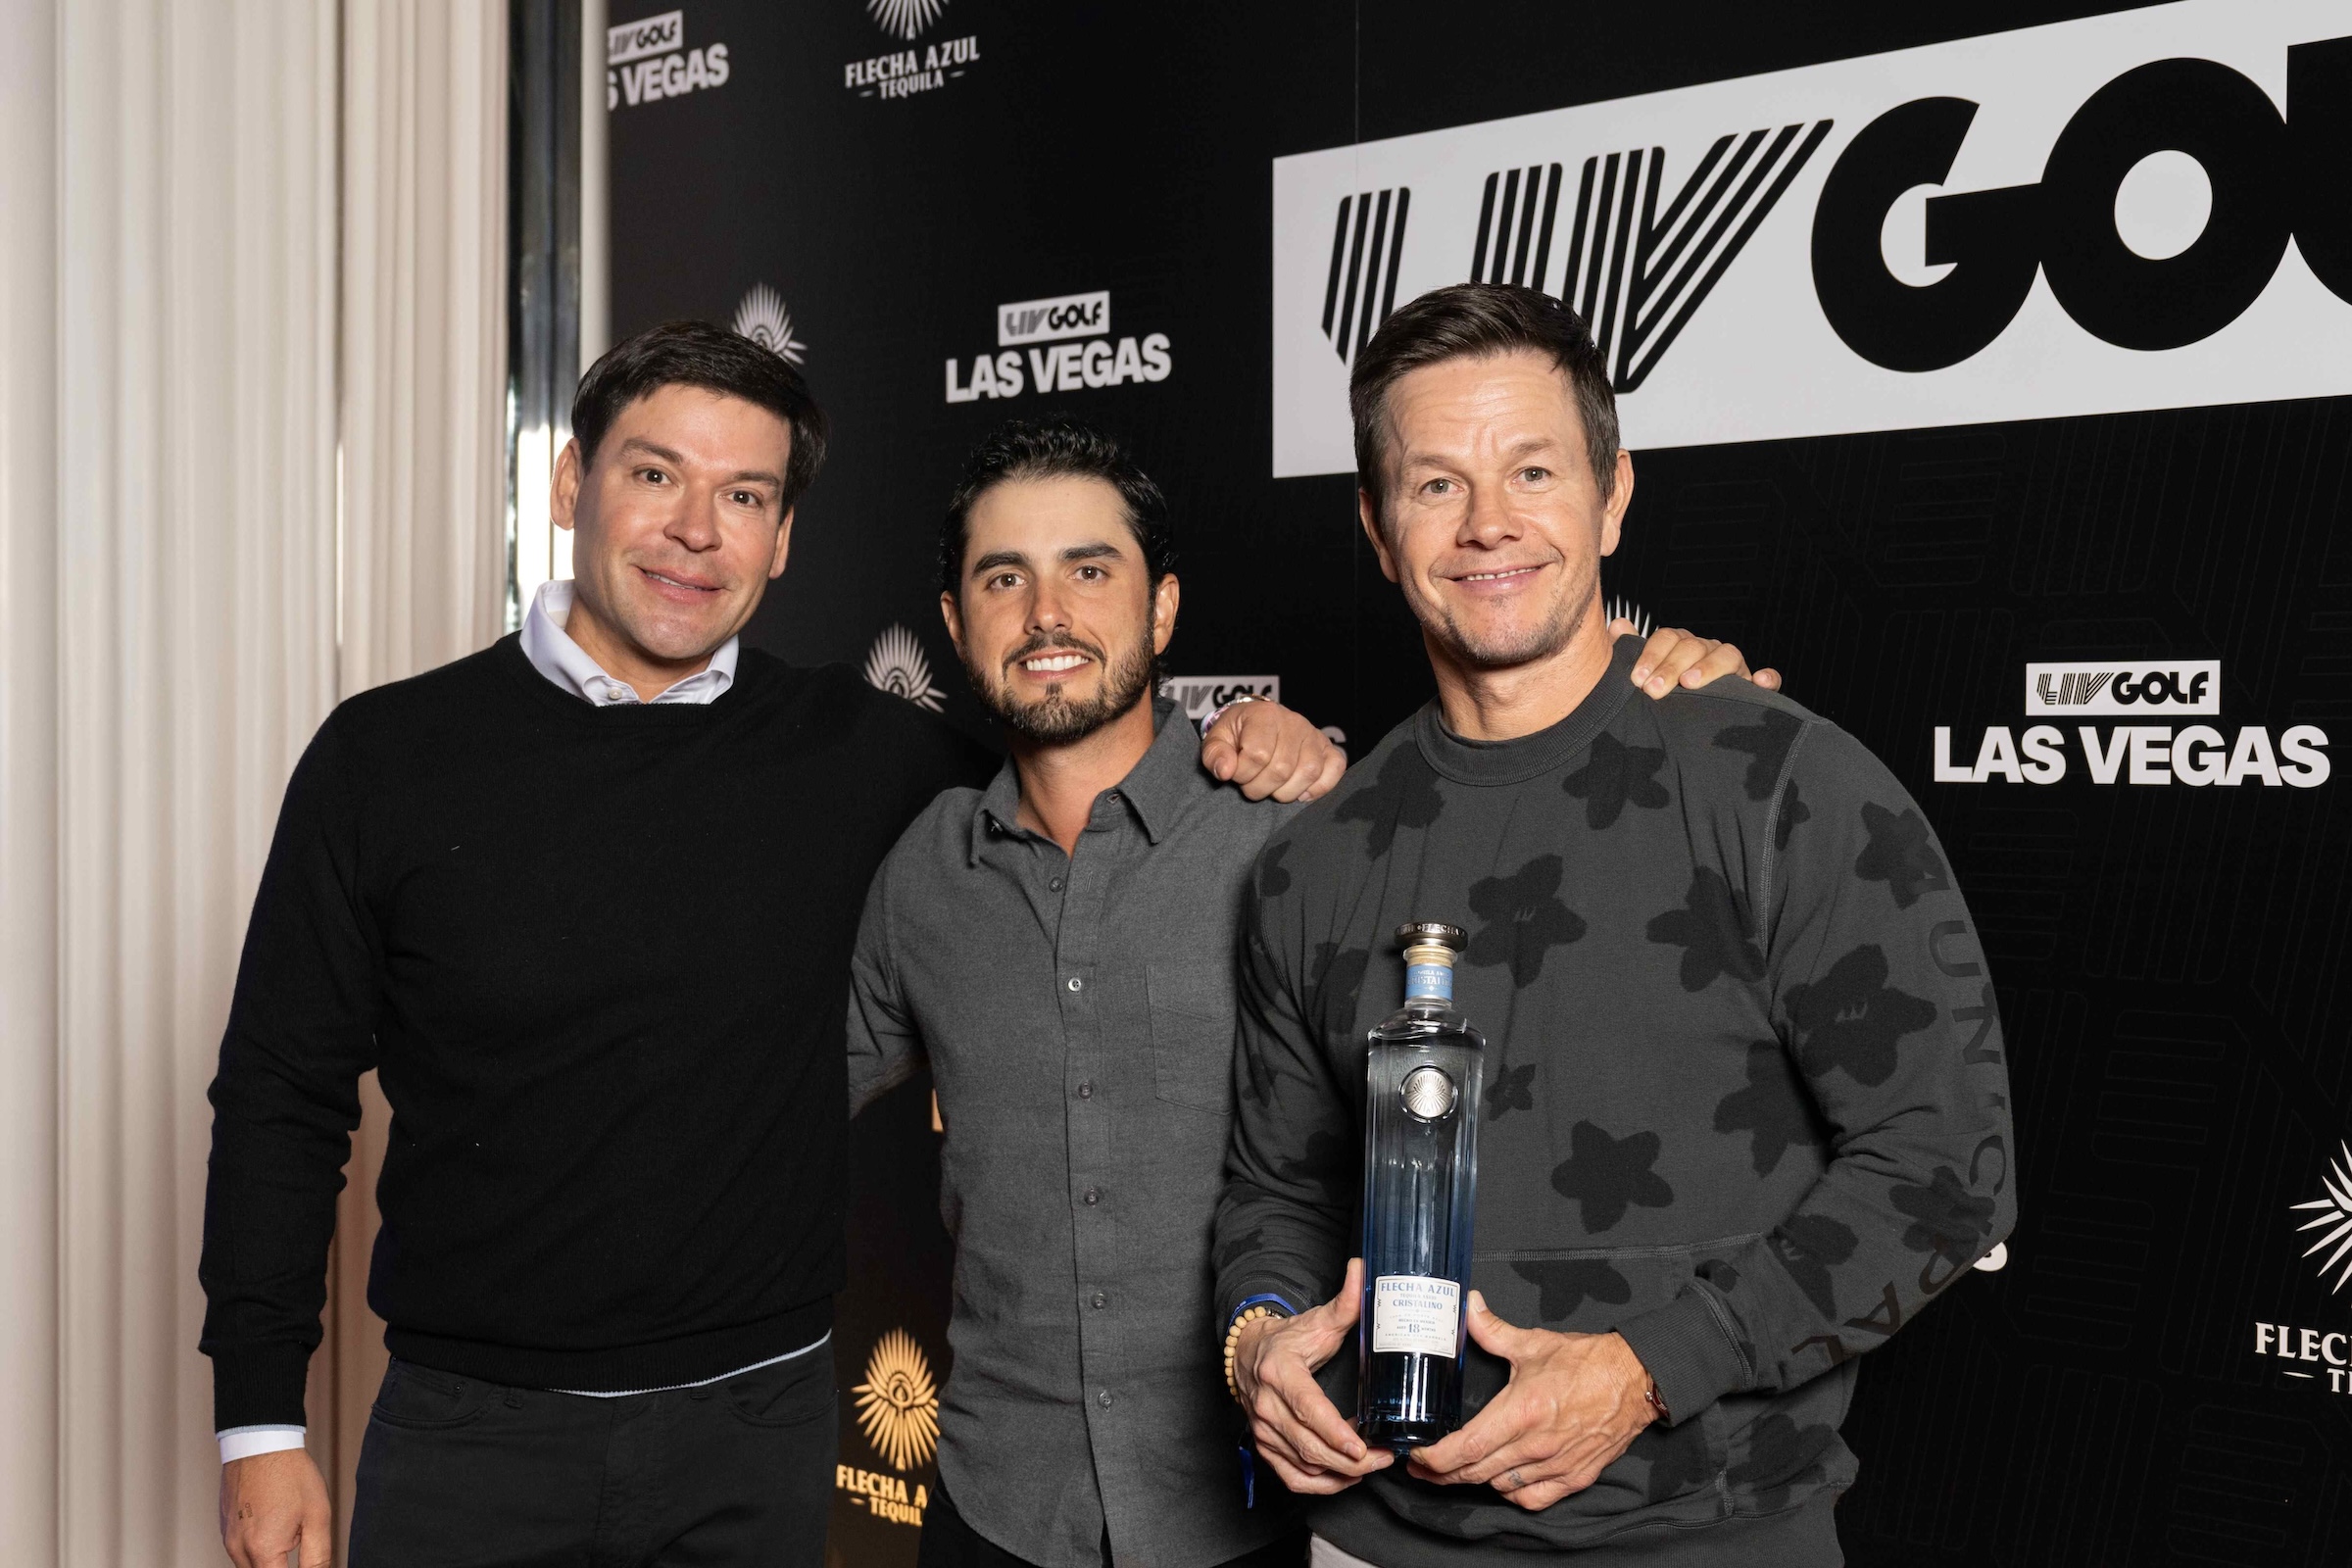 This extravagant soirée, presented by the prestigious Flecha Azul, unfolded in grandeur and was masterfully hosted by the one and only Mark Wahlberg.